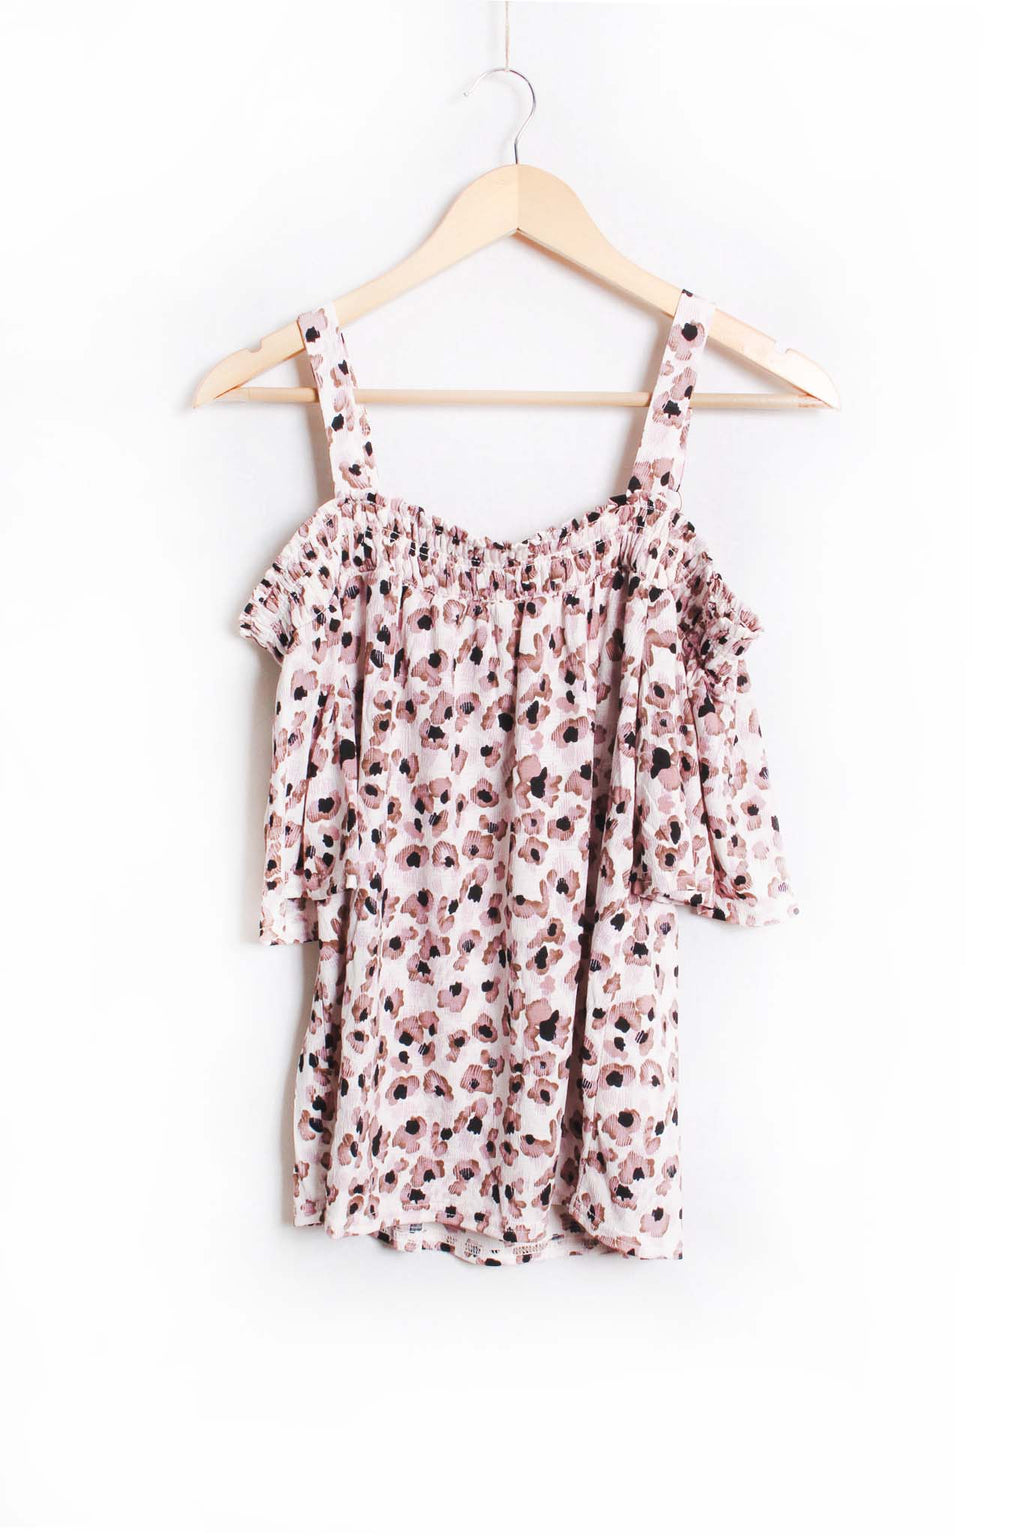 Women's Short Sleeve Strappy Floral Print Top